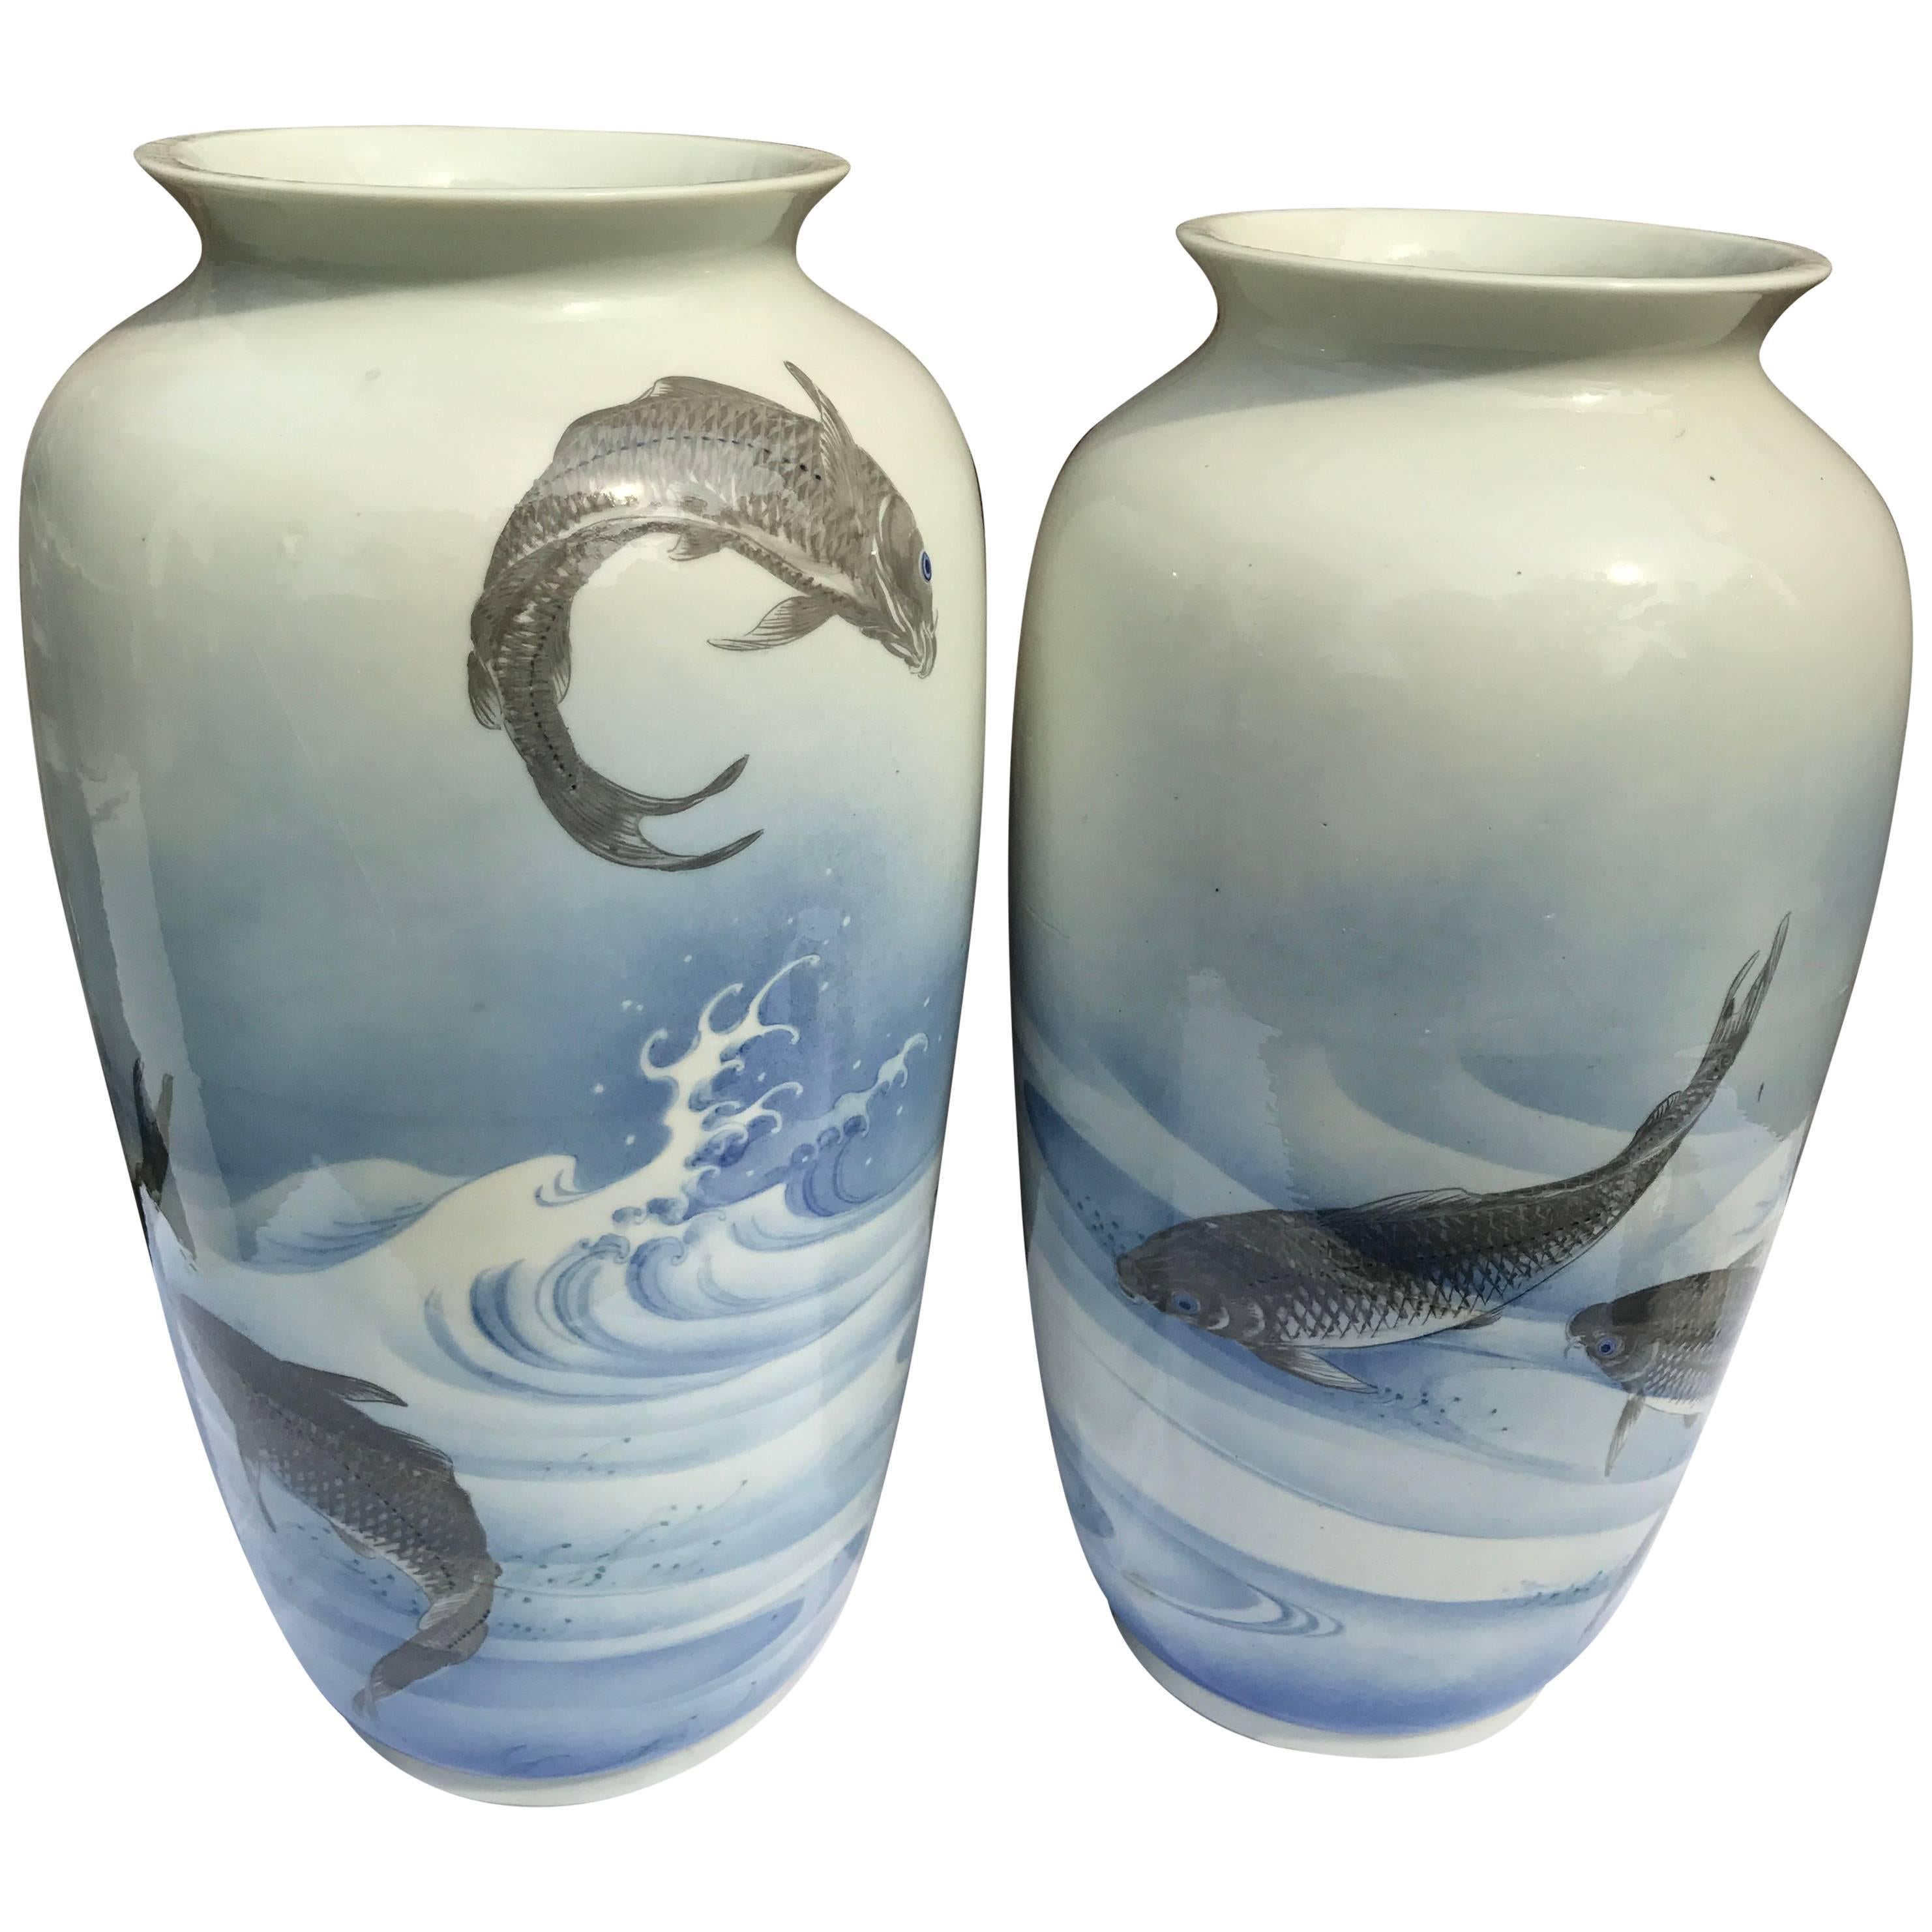 Monumental Japanese Antique Koi & Wave Vases Hand-Painted, Early 20th Century